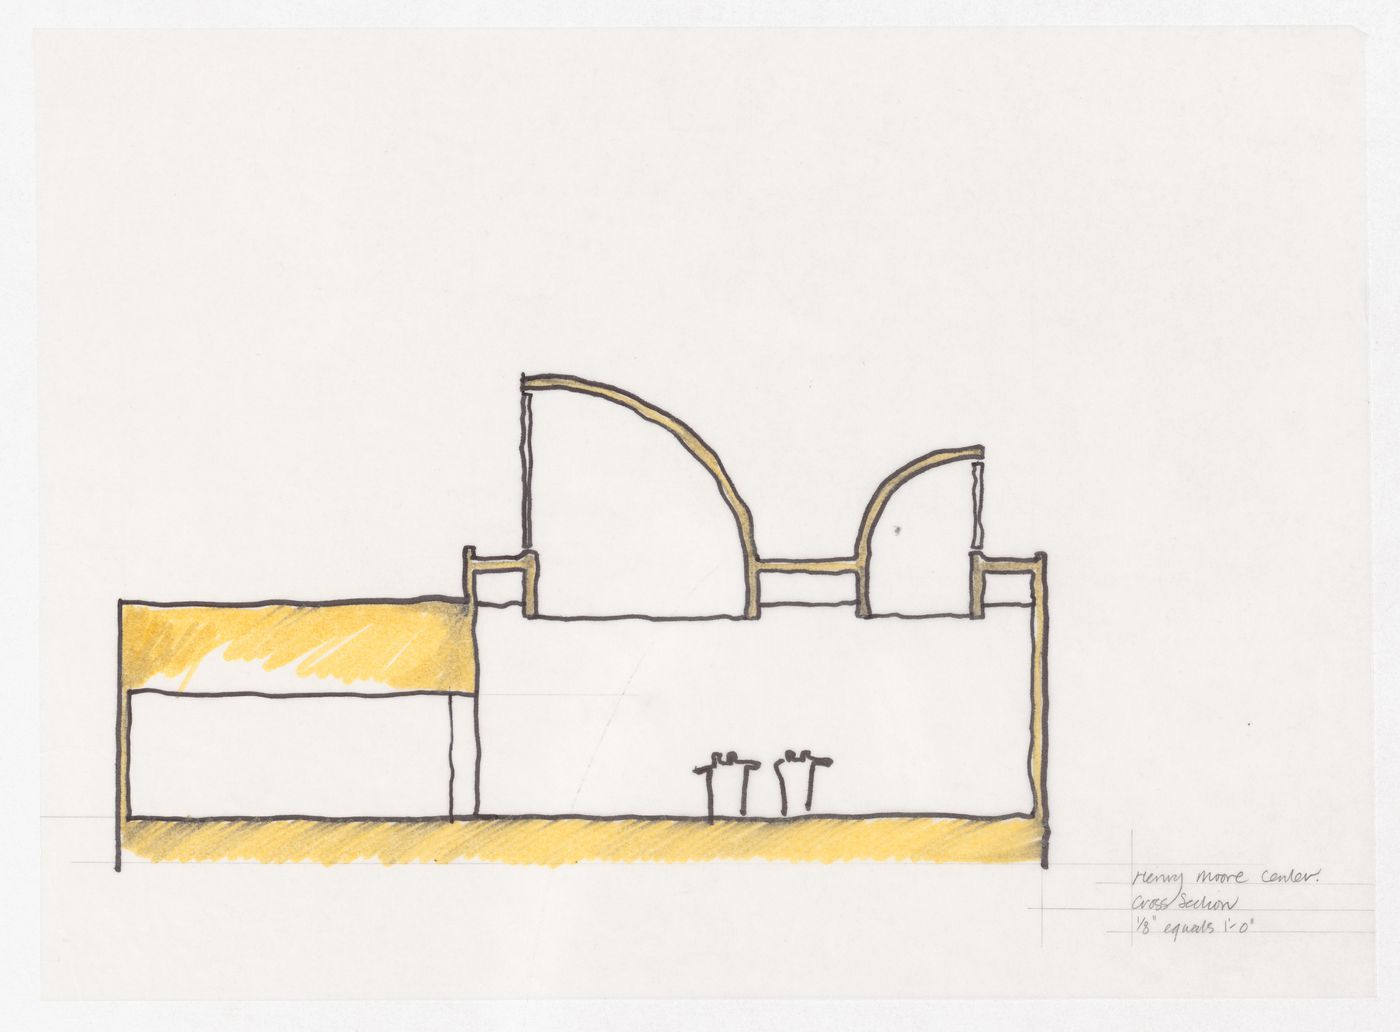 Sketch section for Henry Moore Sculpture Centre, Art Gallery of Ontario, Stage I Expansion, Toronto